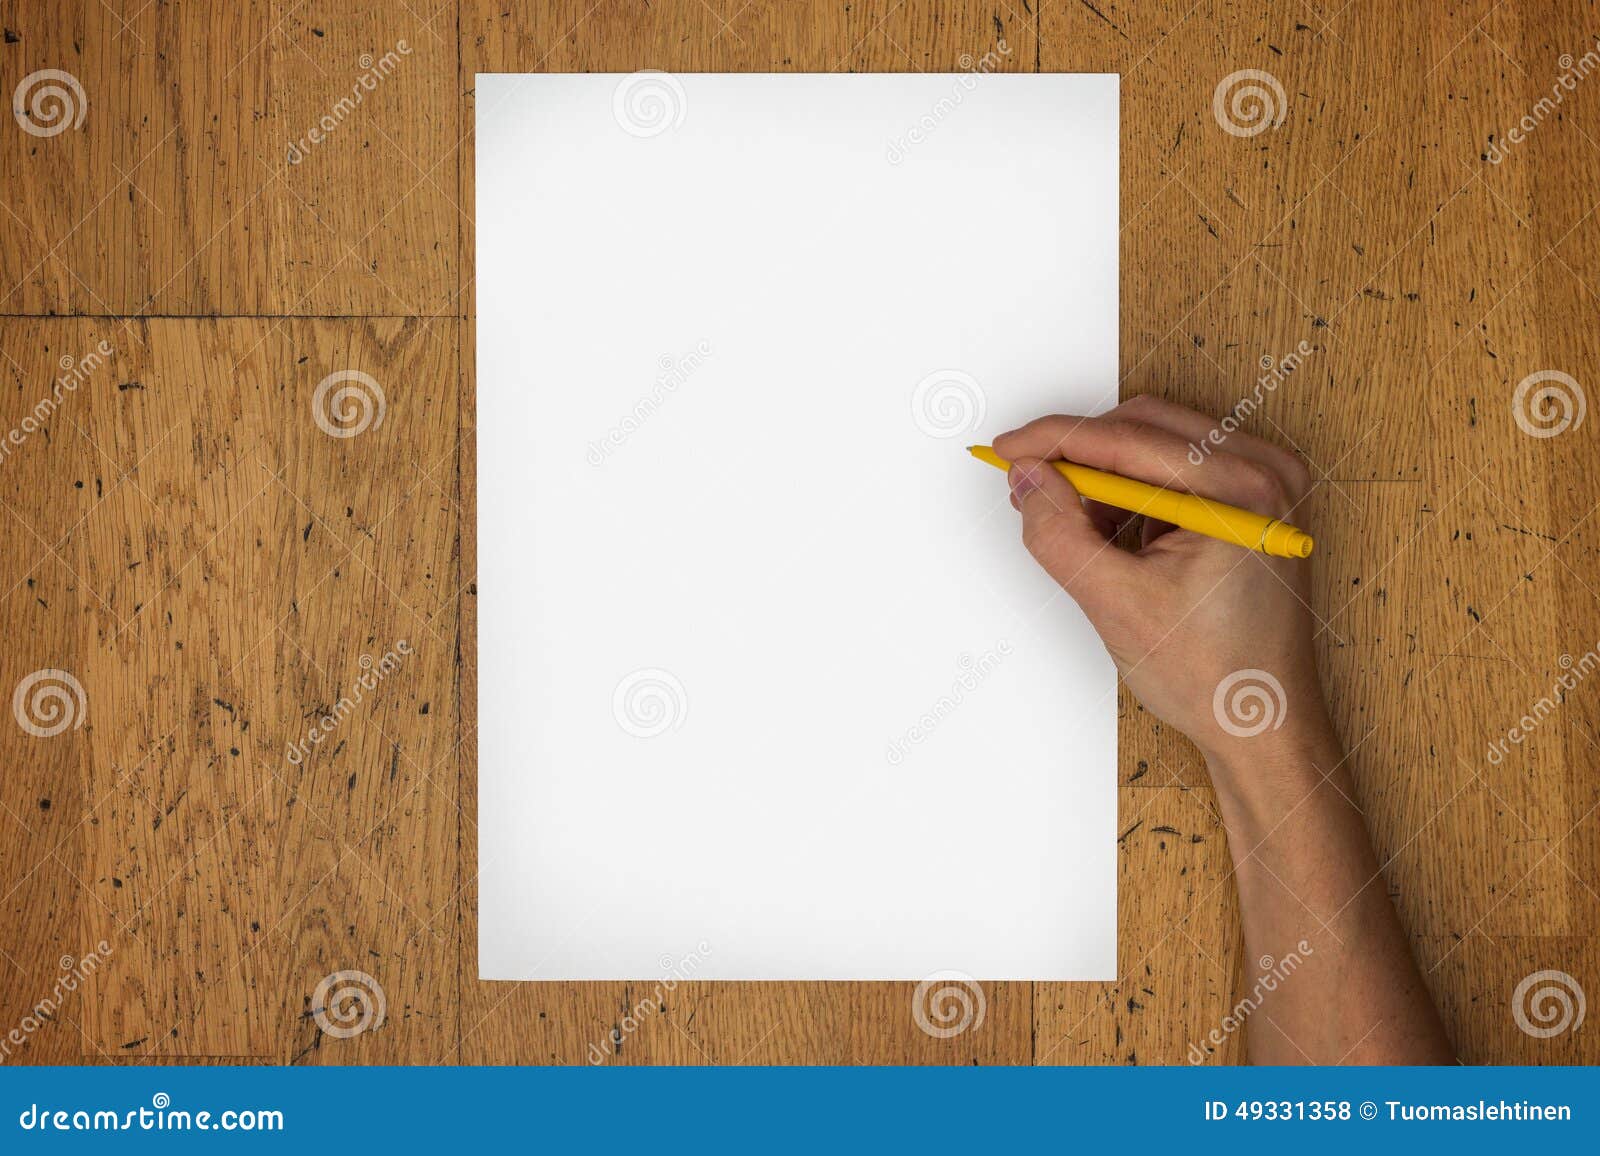 Hand Holding Pen on Blank Paper Sheet on a Table Stock Photo - Image of ...